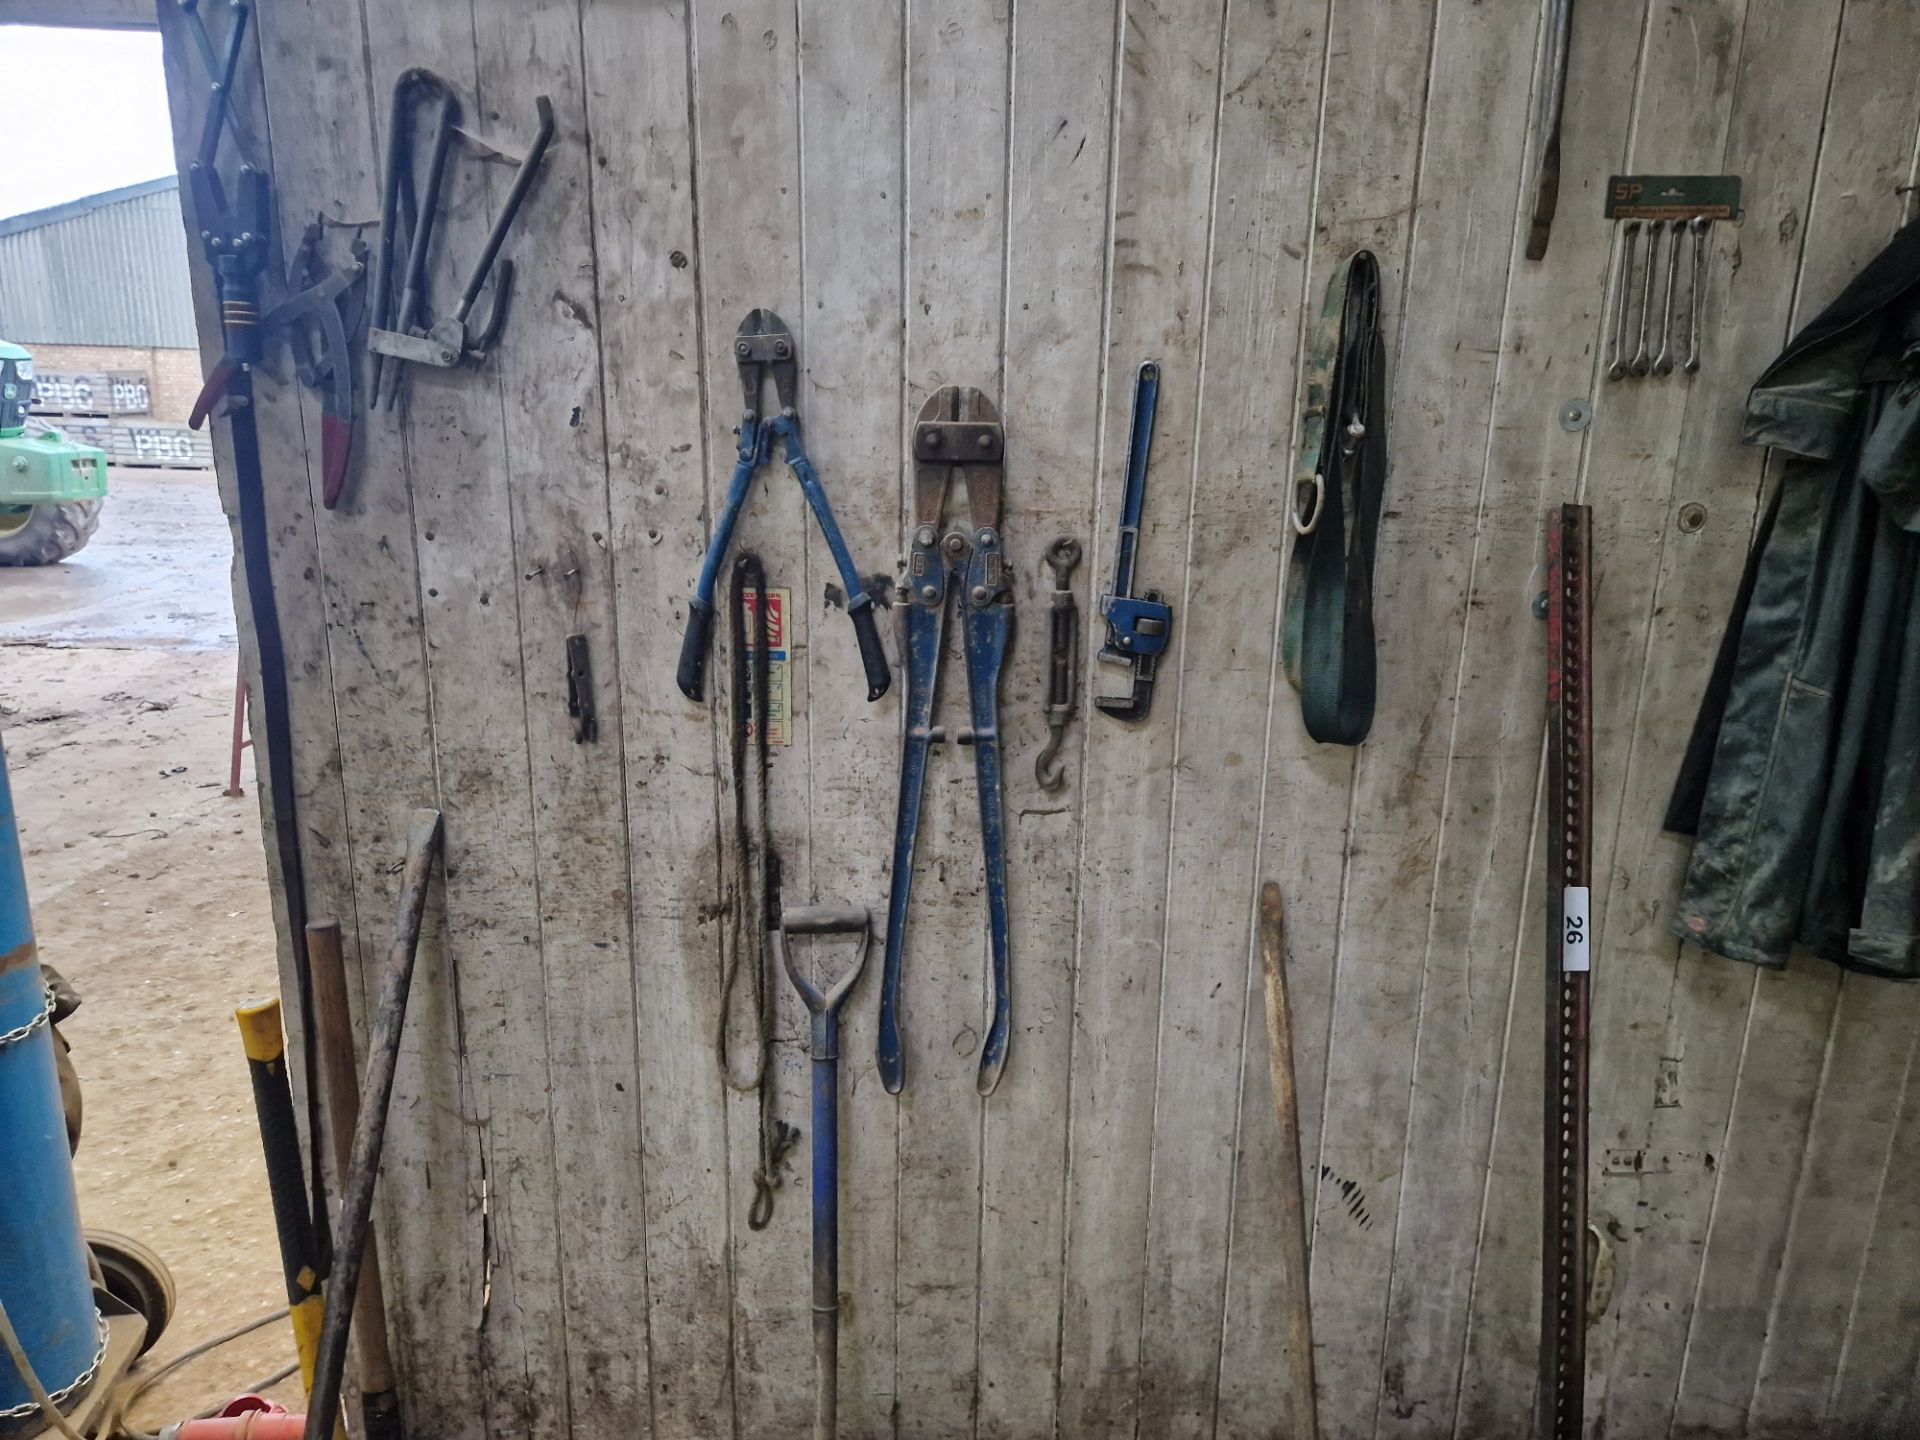 Hammers, tools and crowbars